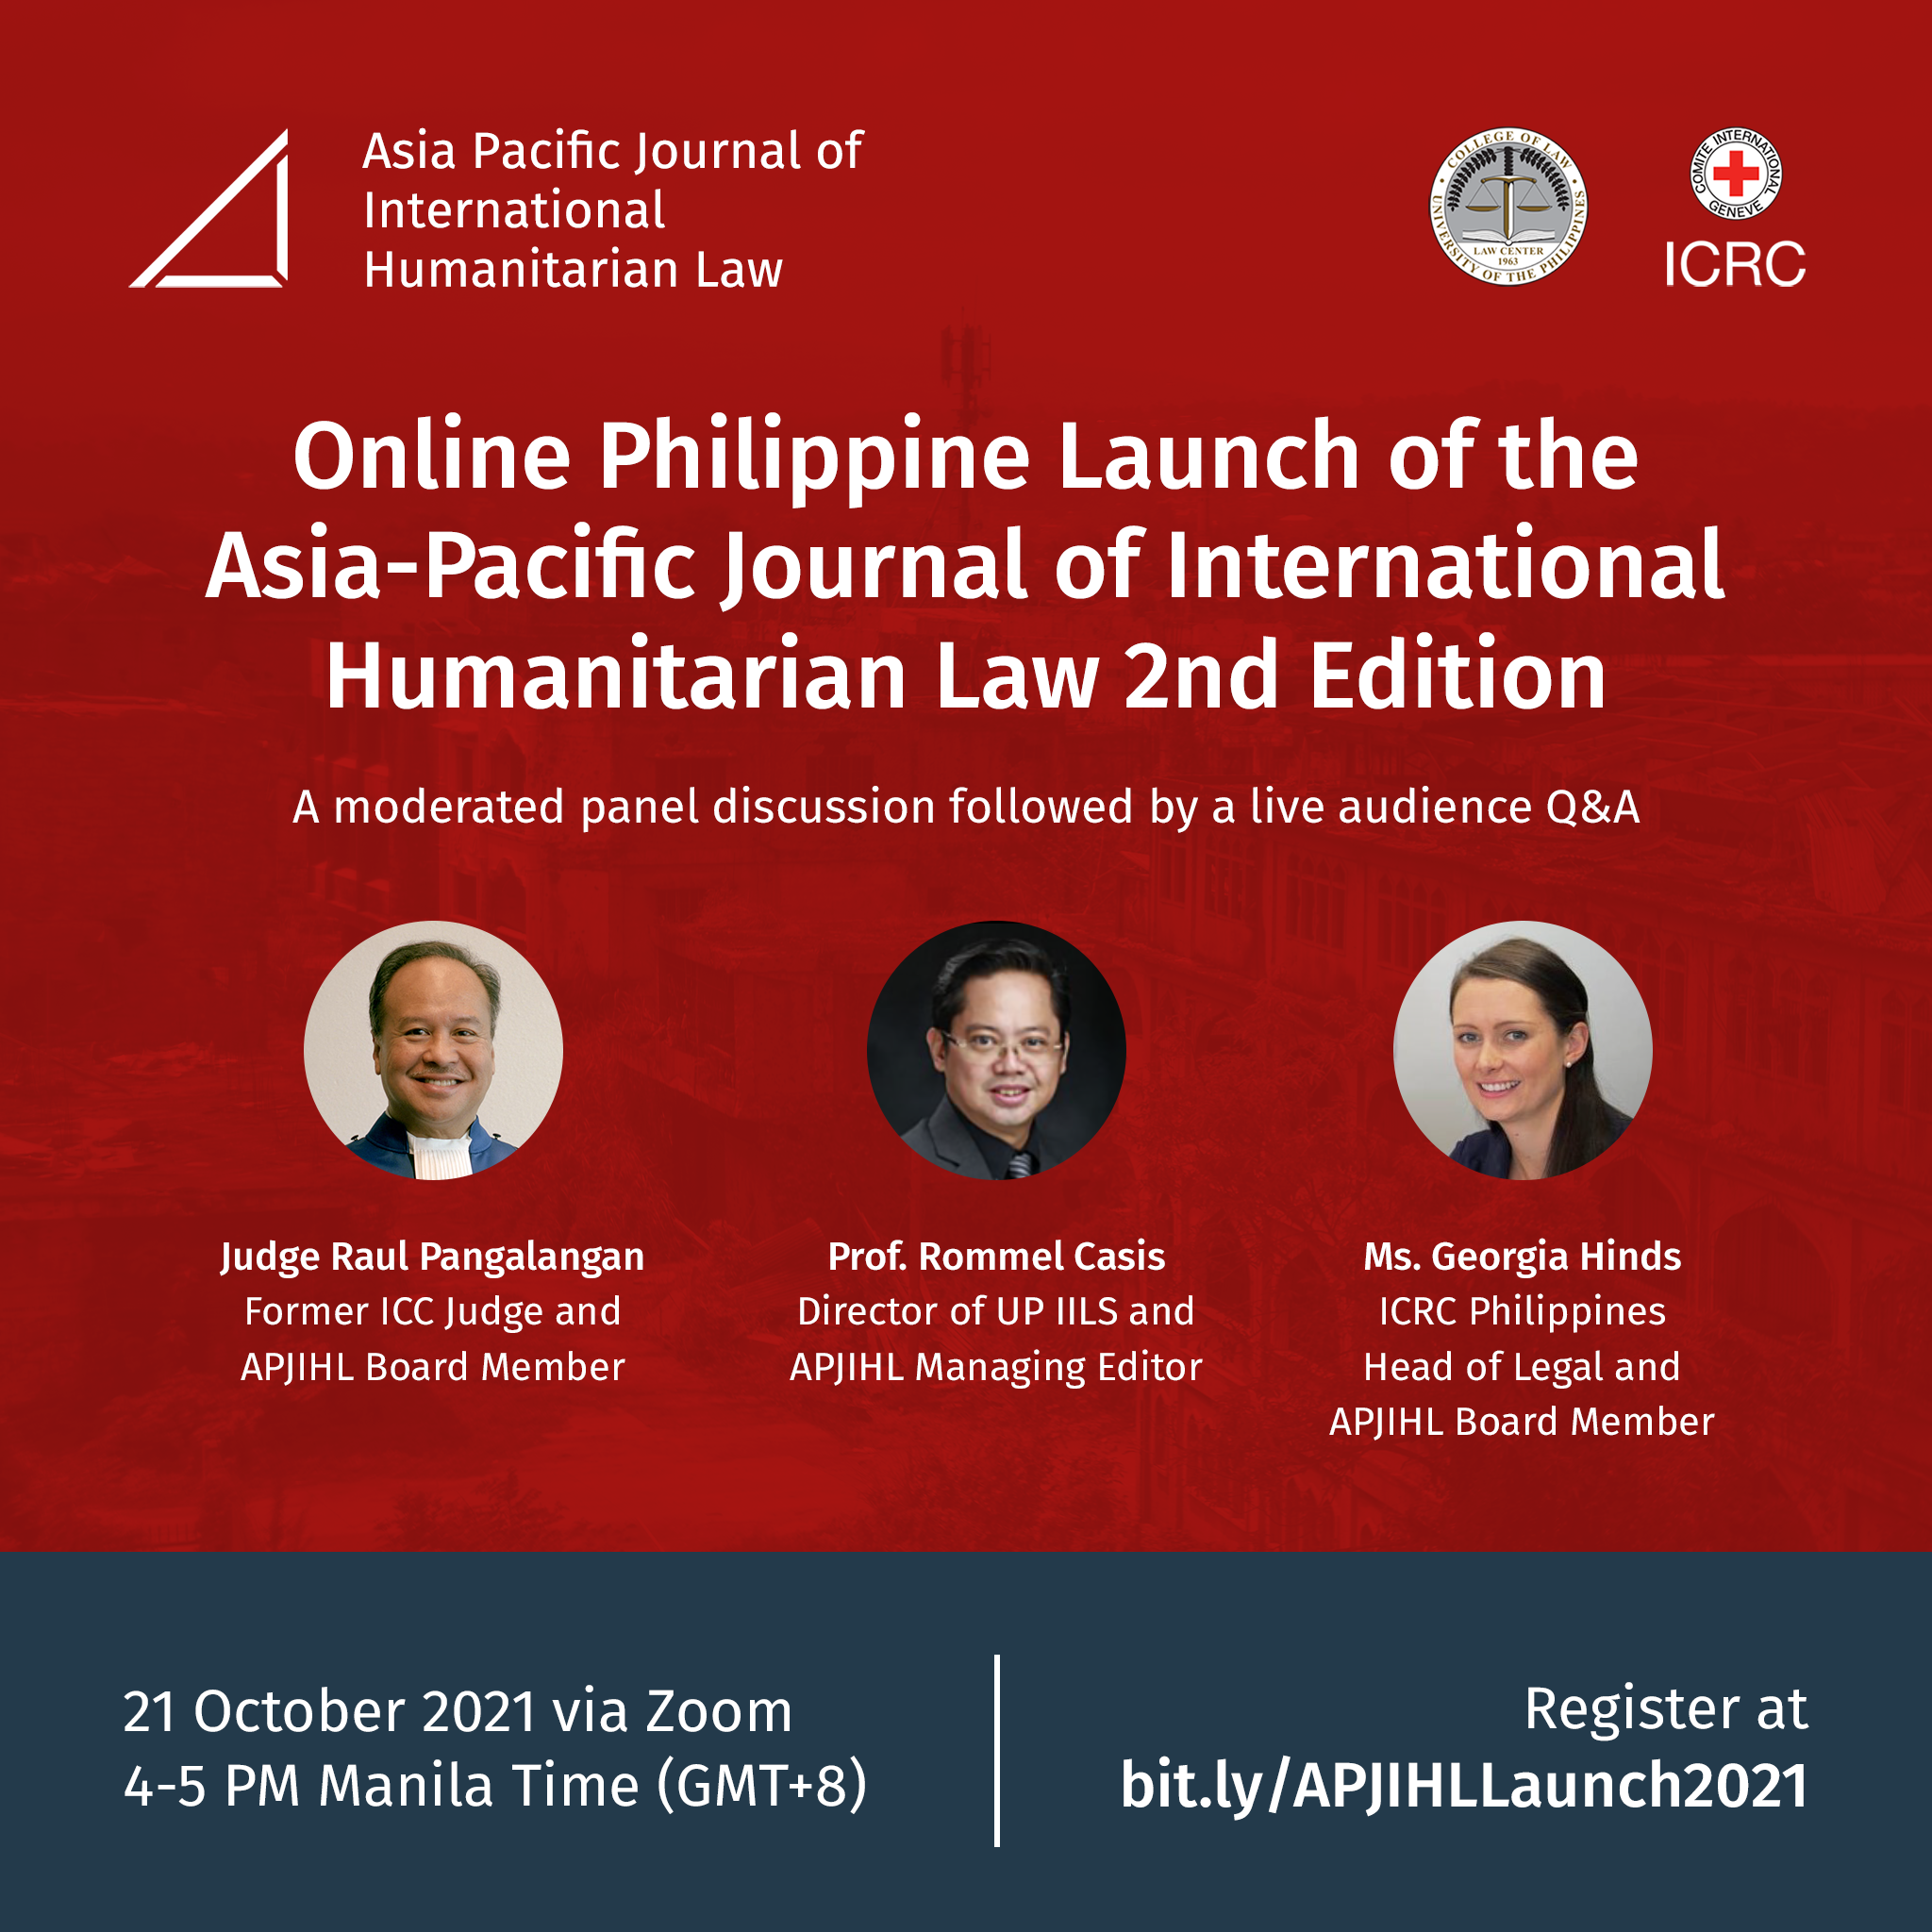 Online Philippine Launch of the Asia-Pacific Journal of International Humanitarian Law 2nd Edition